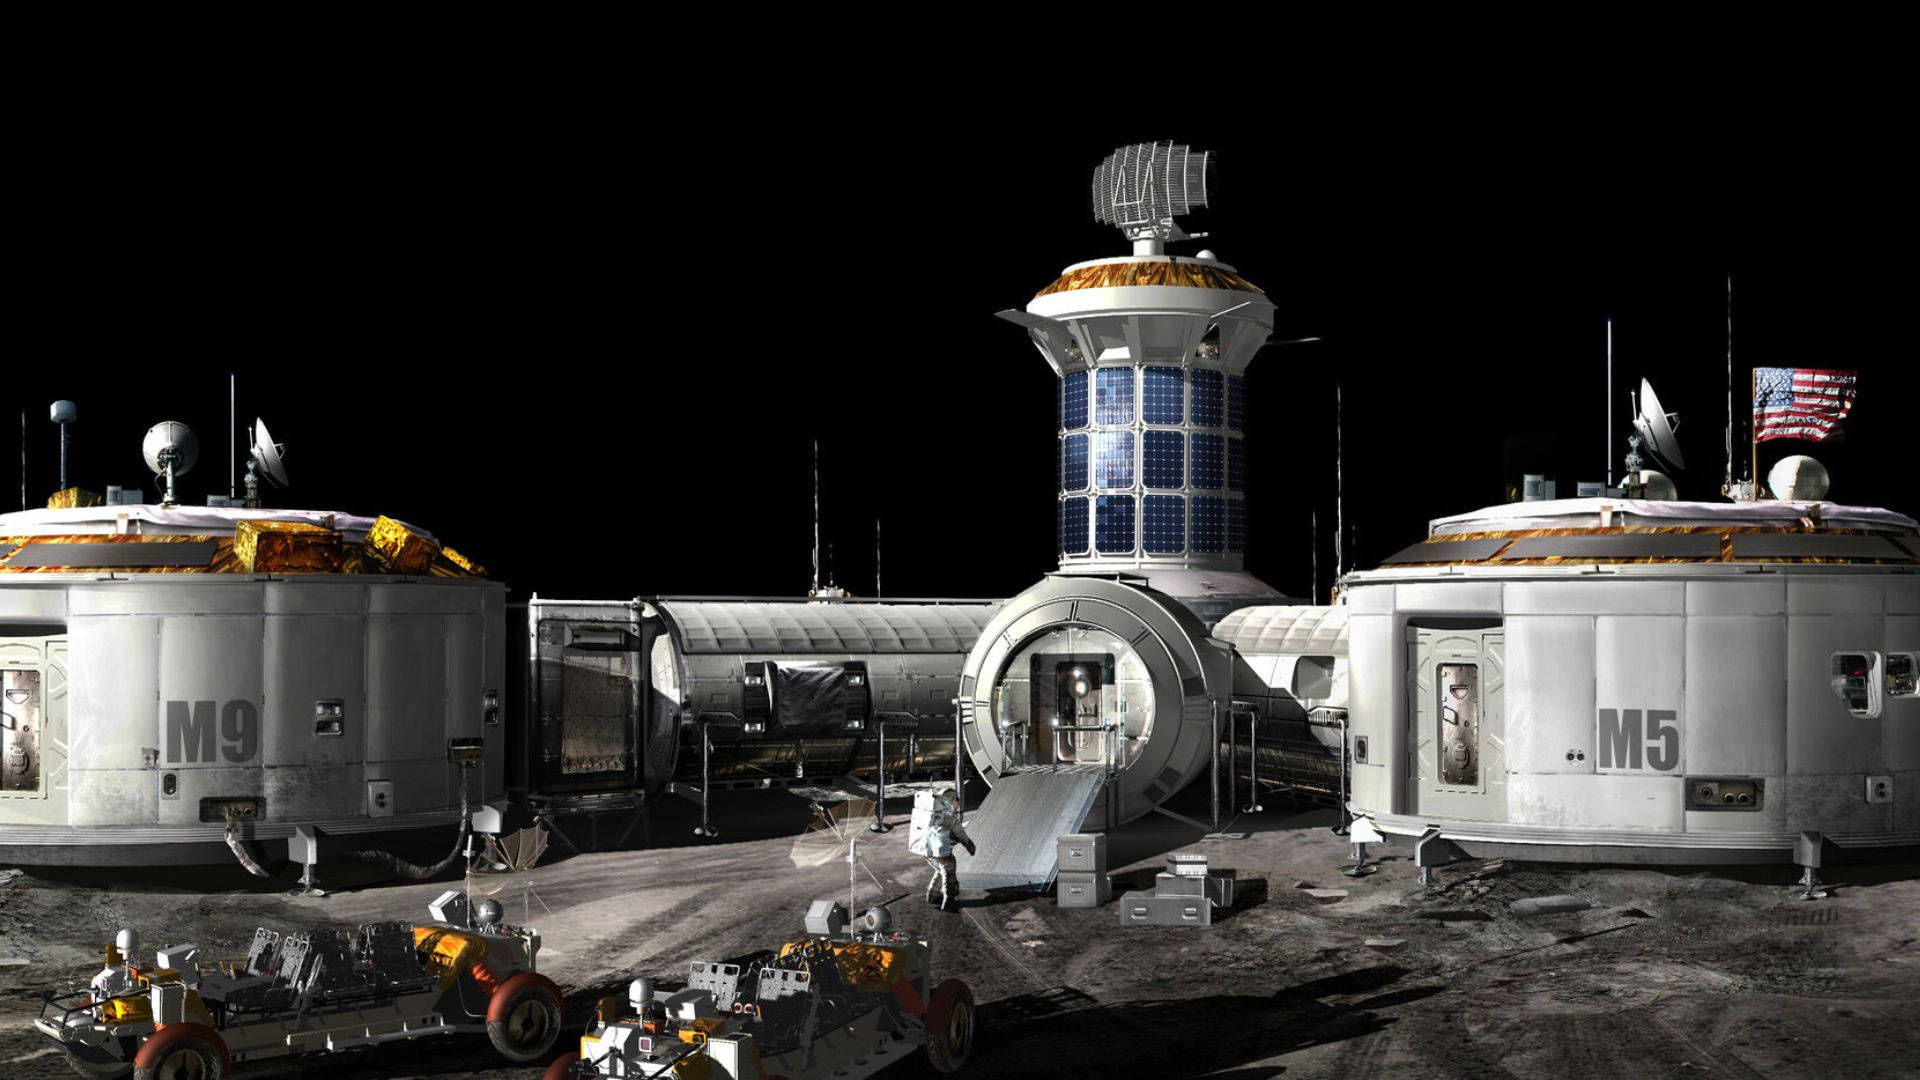 Jamestown Base On Moon - Scene From For All Mankind Series Background